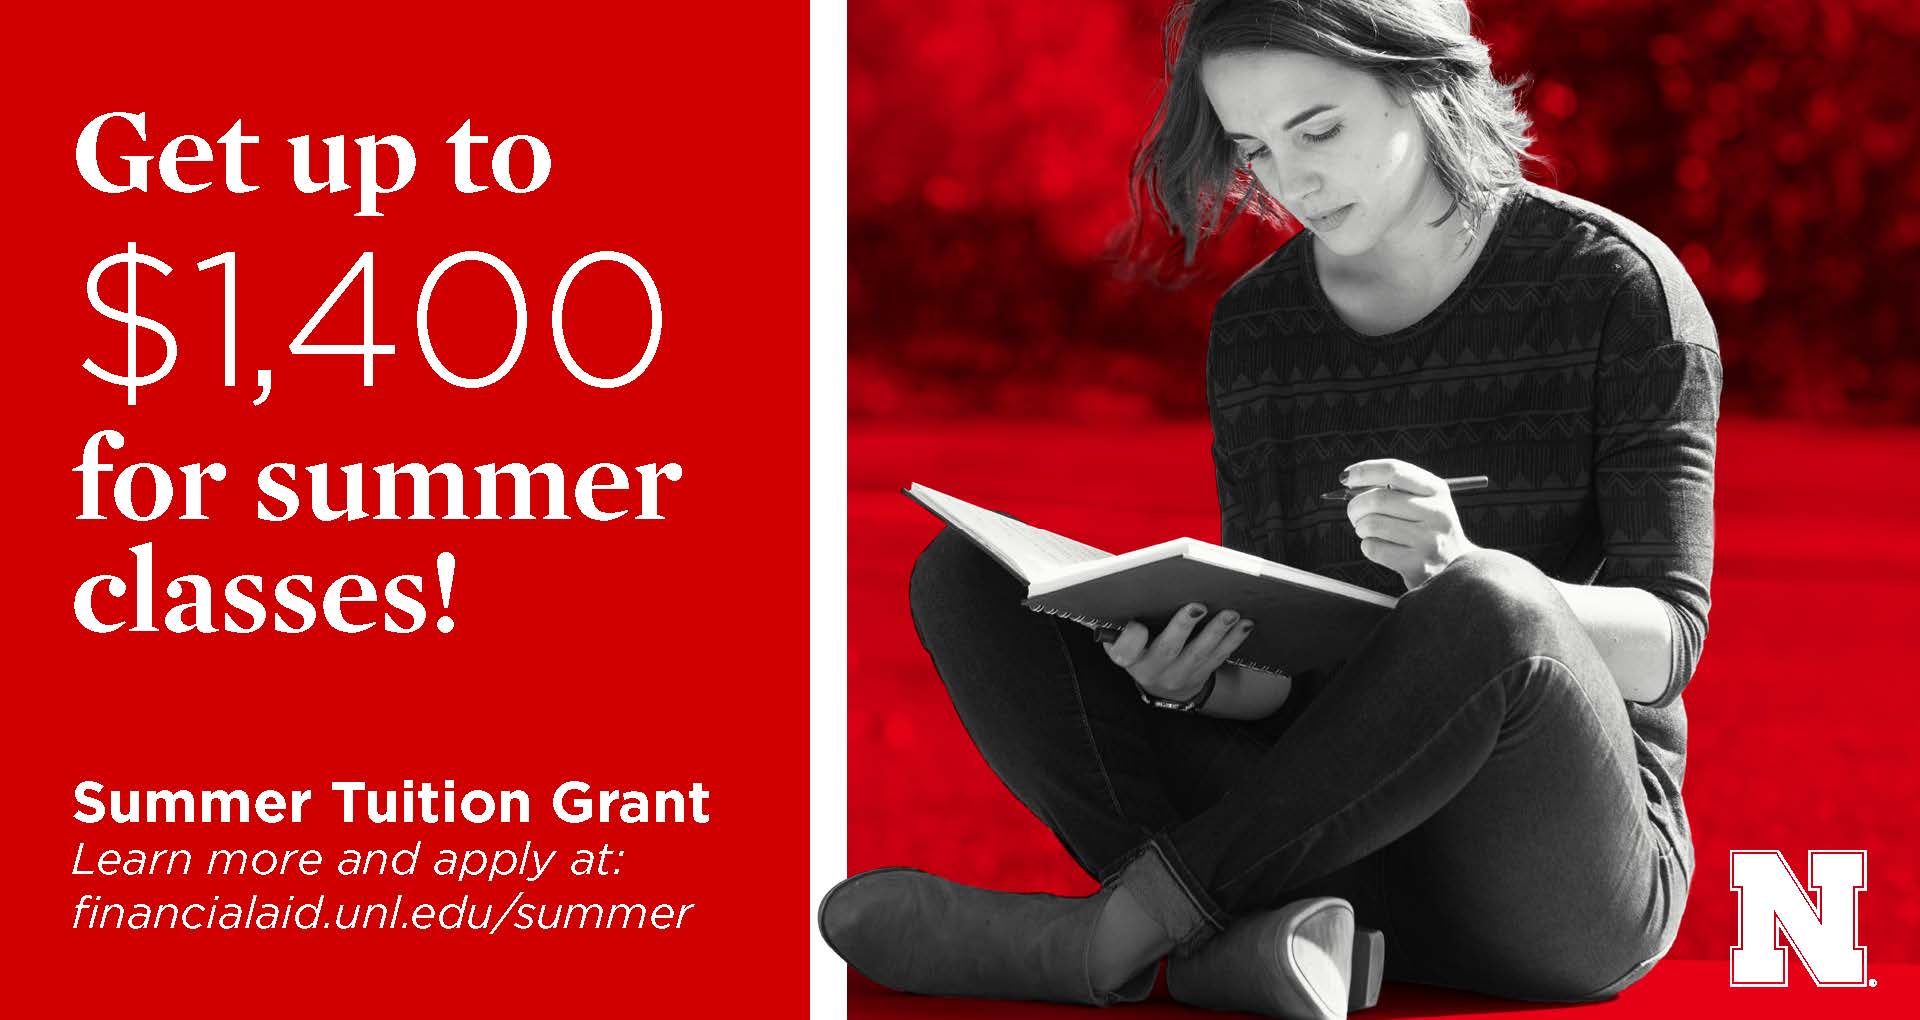 Get up to 1,400 for summer classes! Announce University of